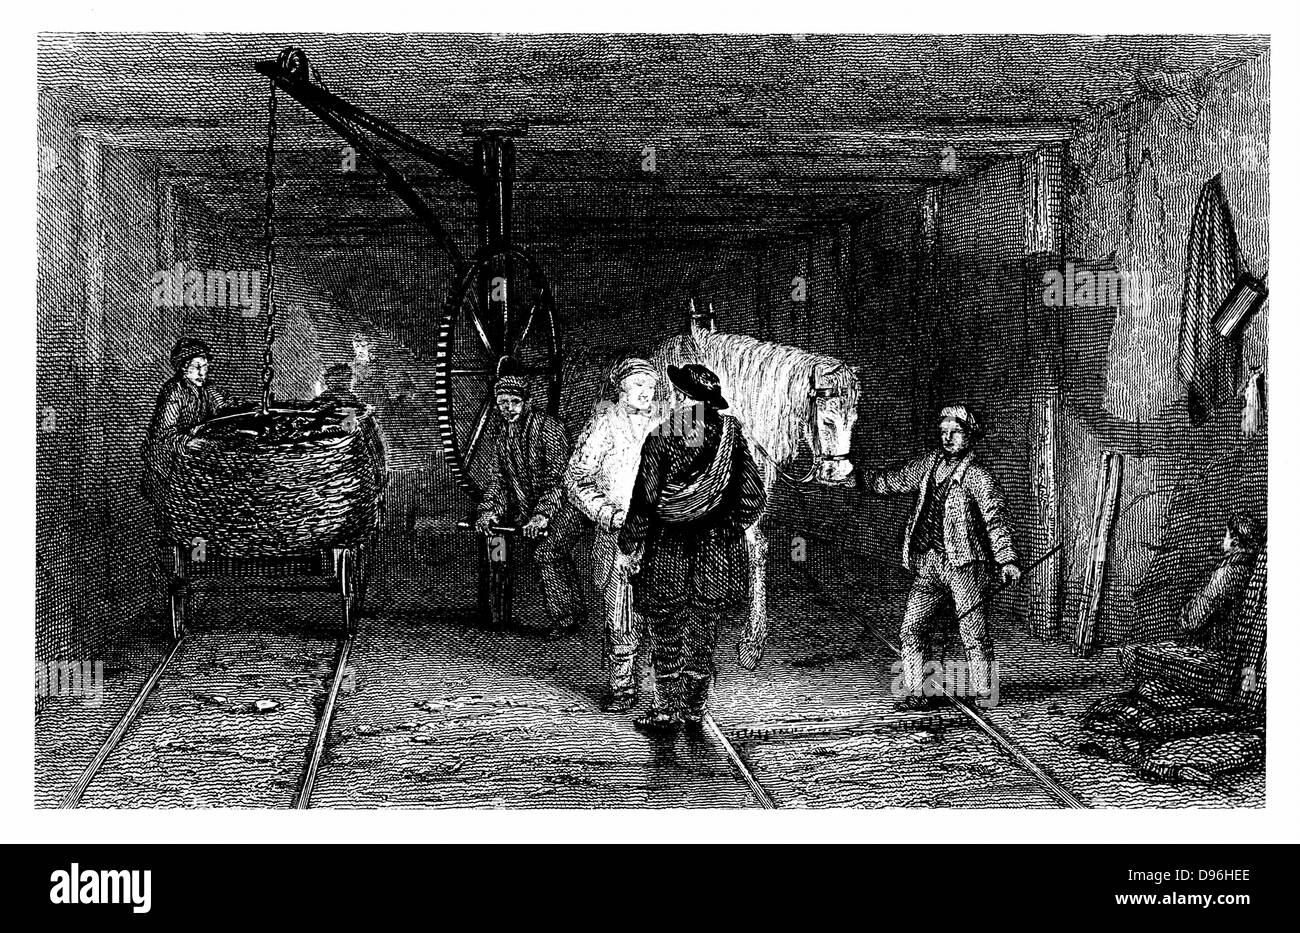 Coal Mining: Underground scene showing full baskets (corves) of coal being loaded on a tram wagon using a crane. Pit ponies used to haul coal  underground.  From W Fordyce 'A History of Coal, Coke, Coal Fields ...' London 1860. Engraving. Stock Photo